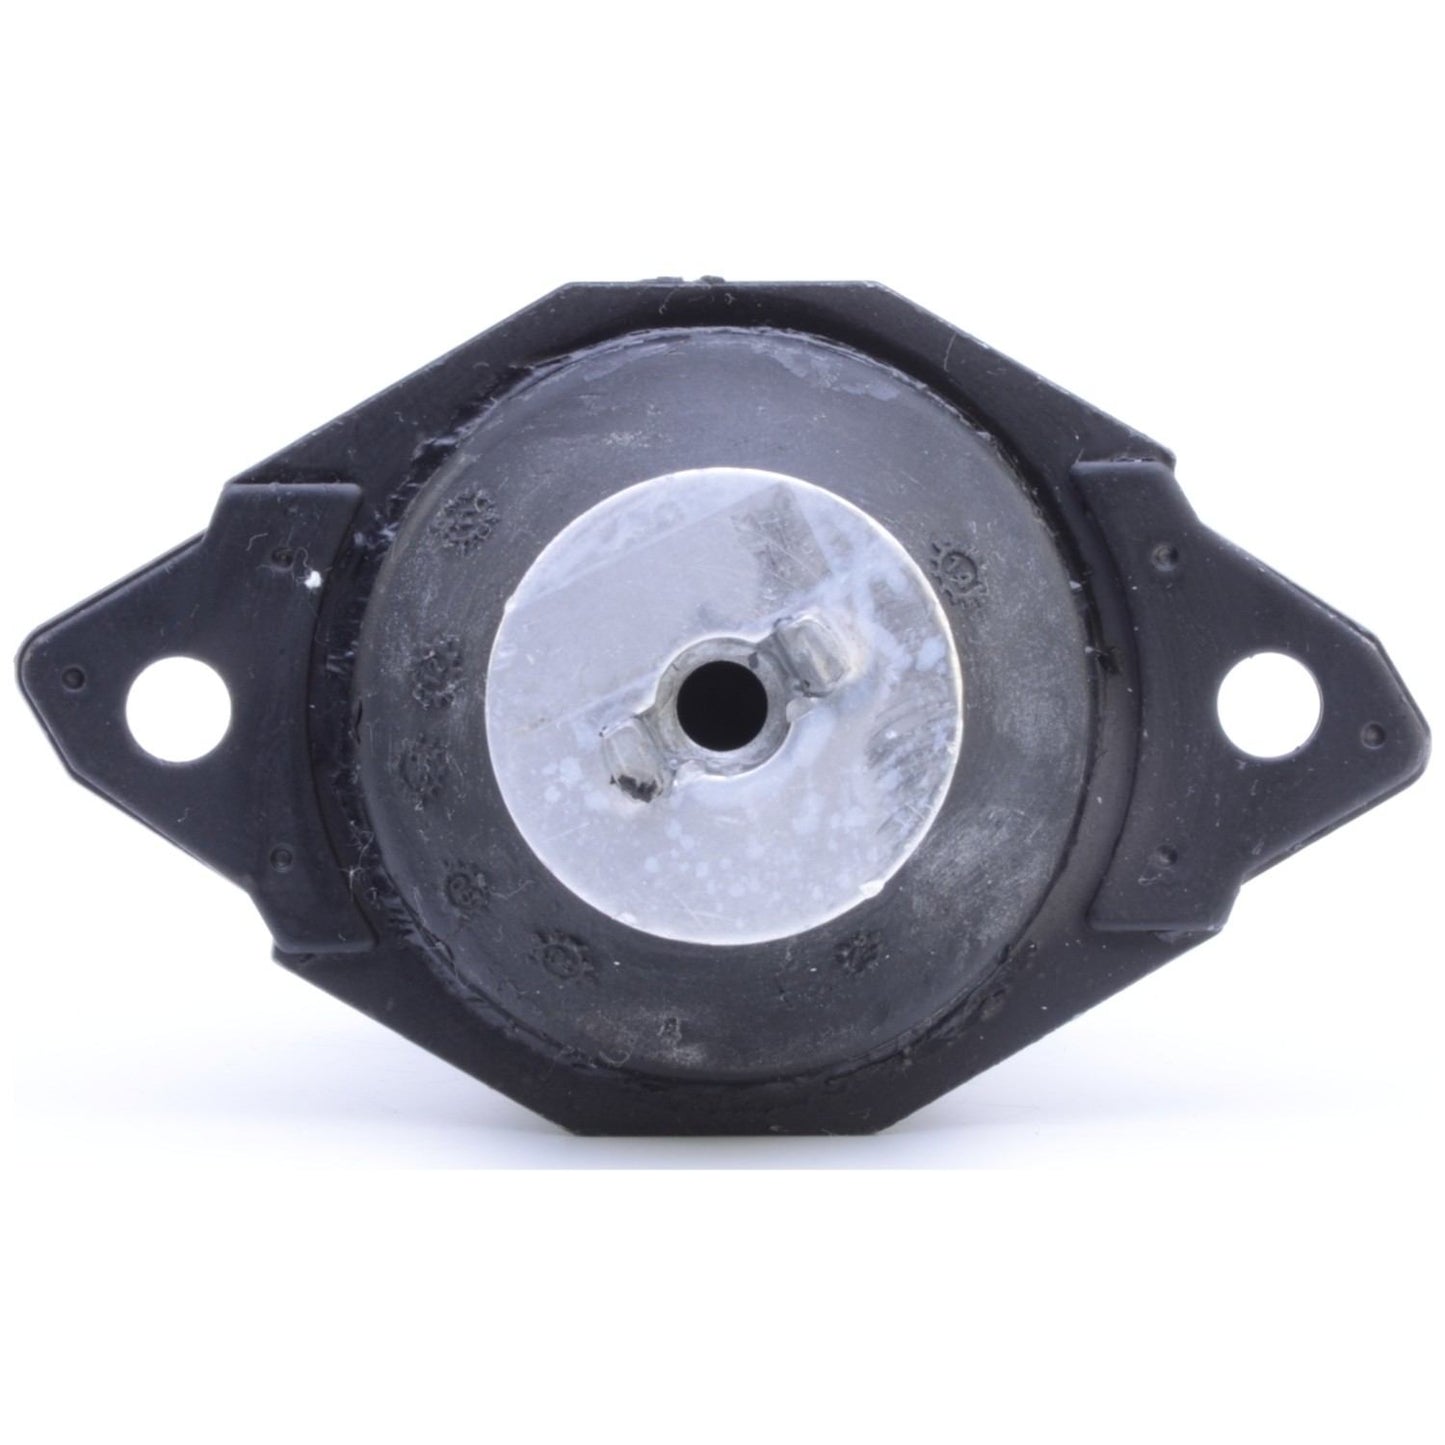 Front View of Left Automatic Transmission Mount ANCHOR 8236